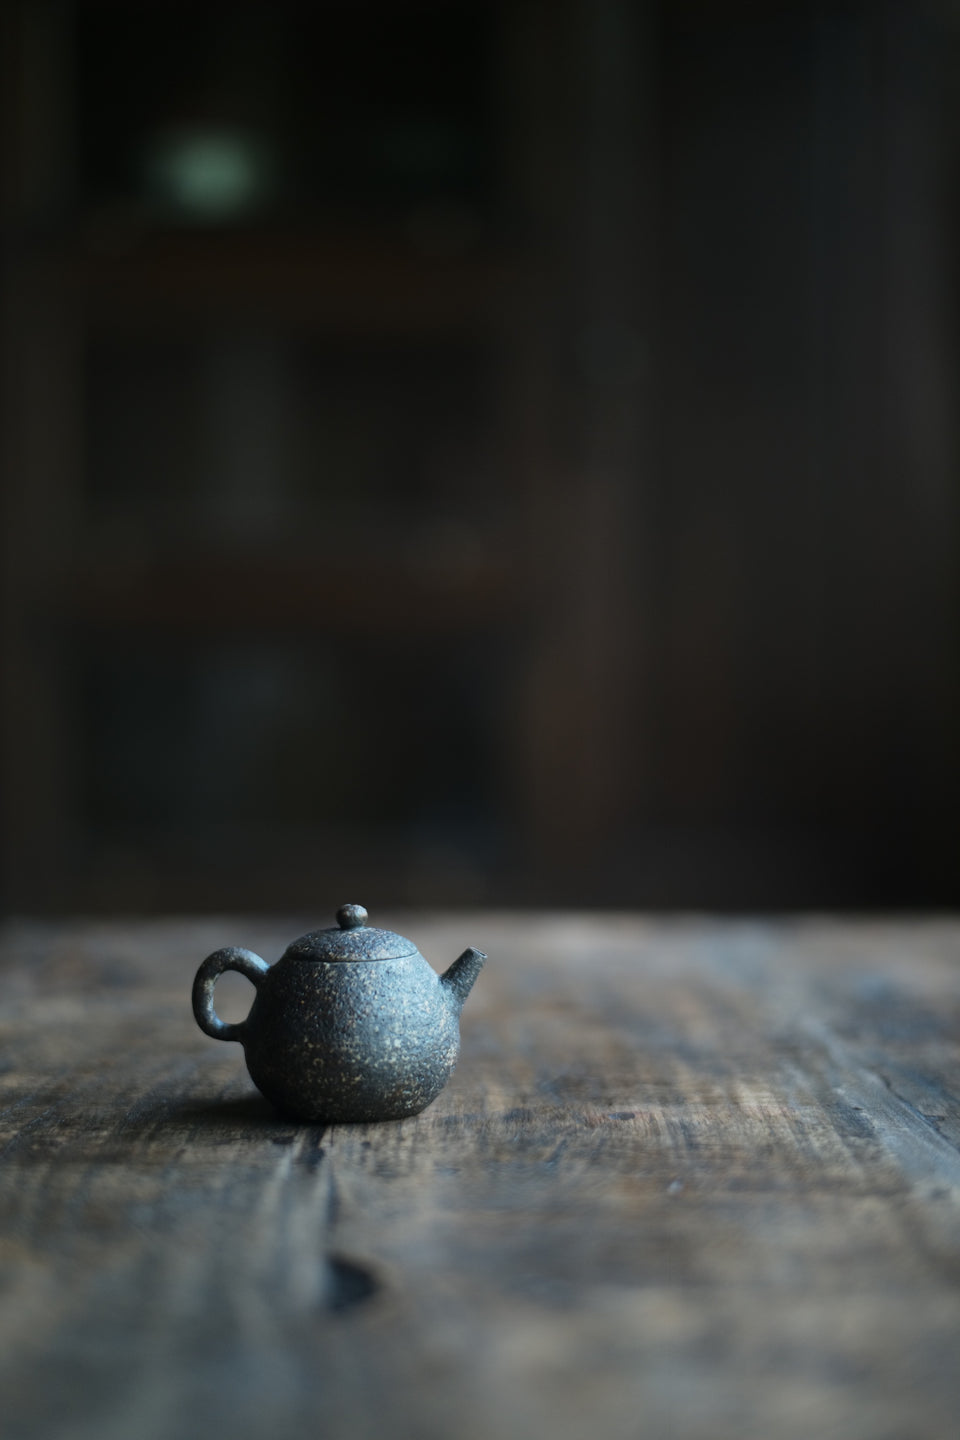 Natural Earth Textured Teapot #4 by Chengwei